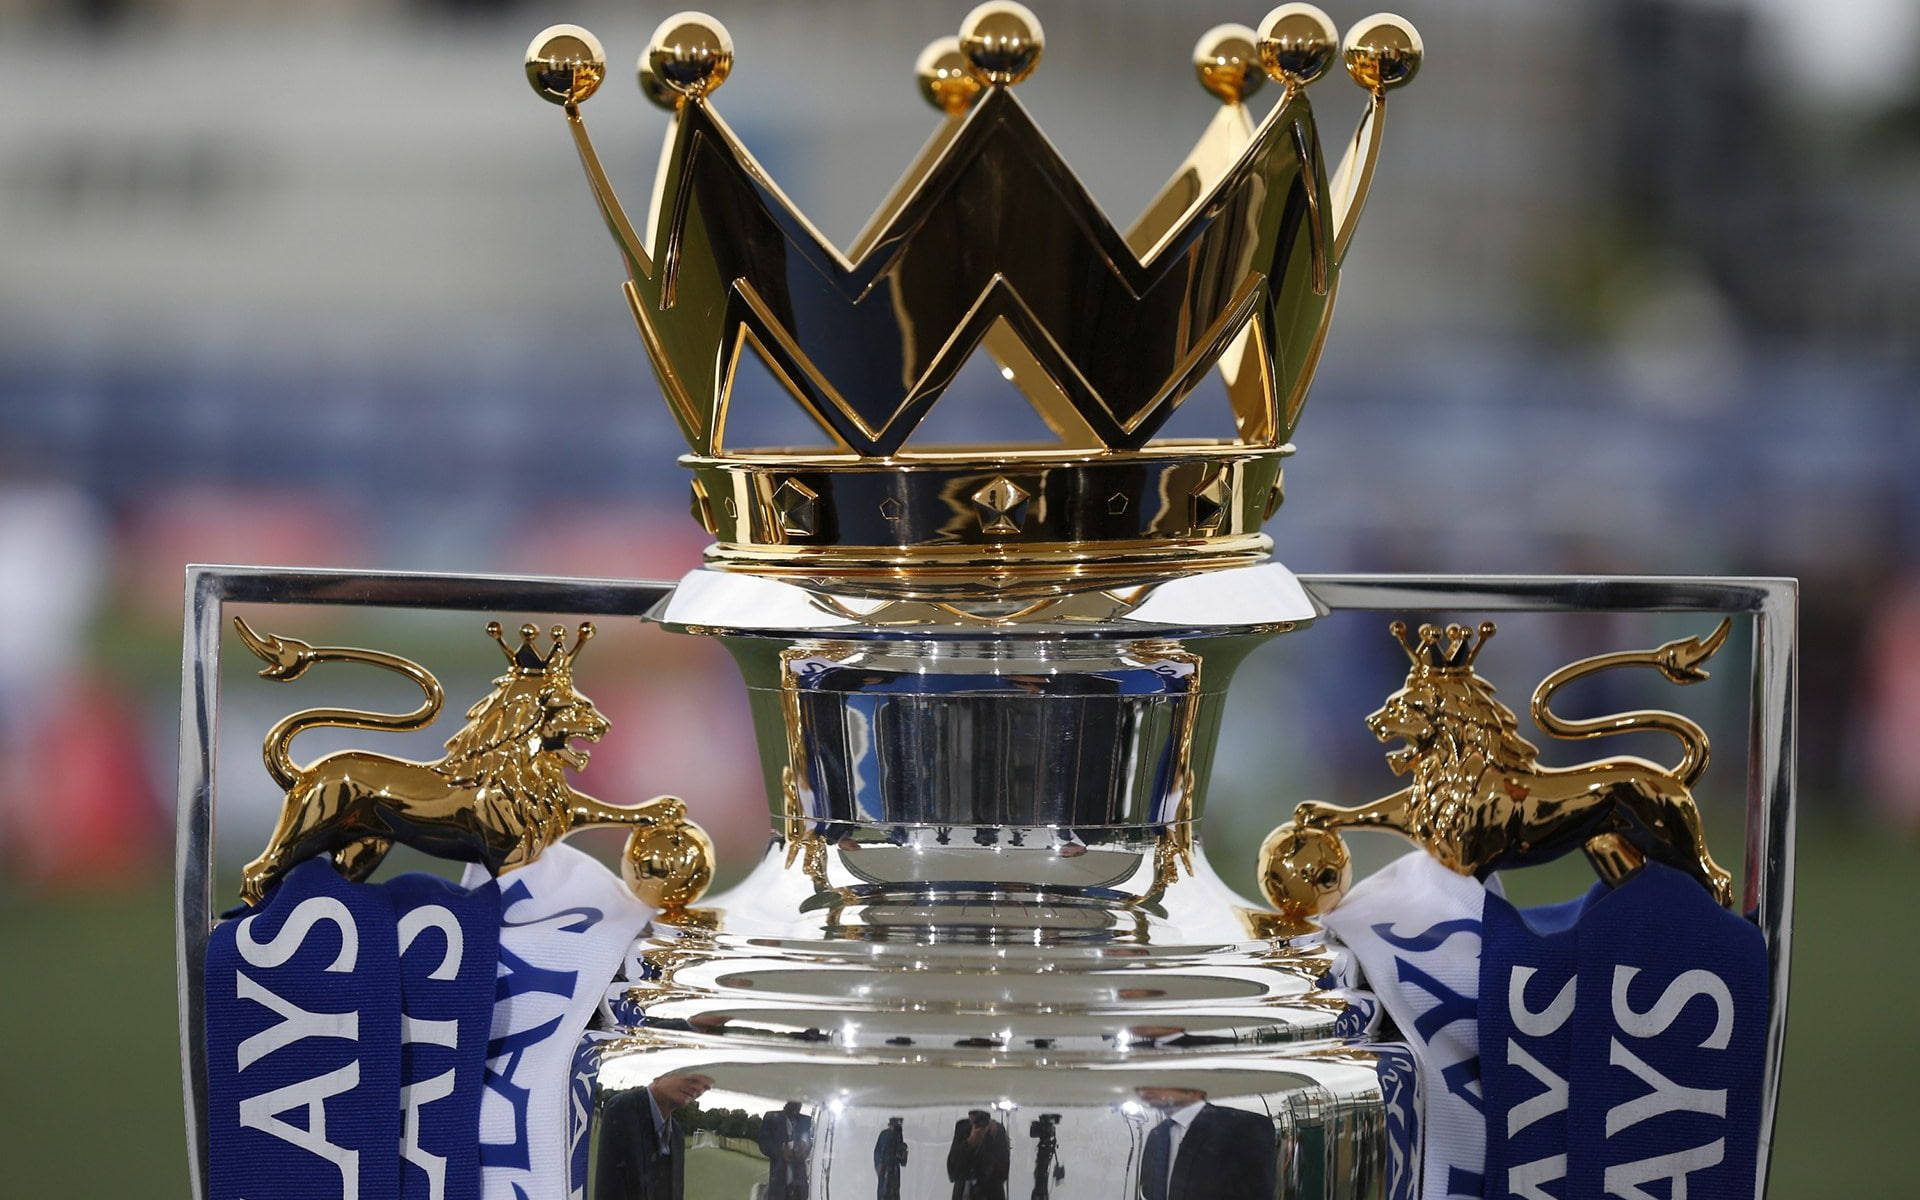 Glittering Trophy Of The Premier League Background